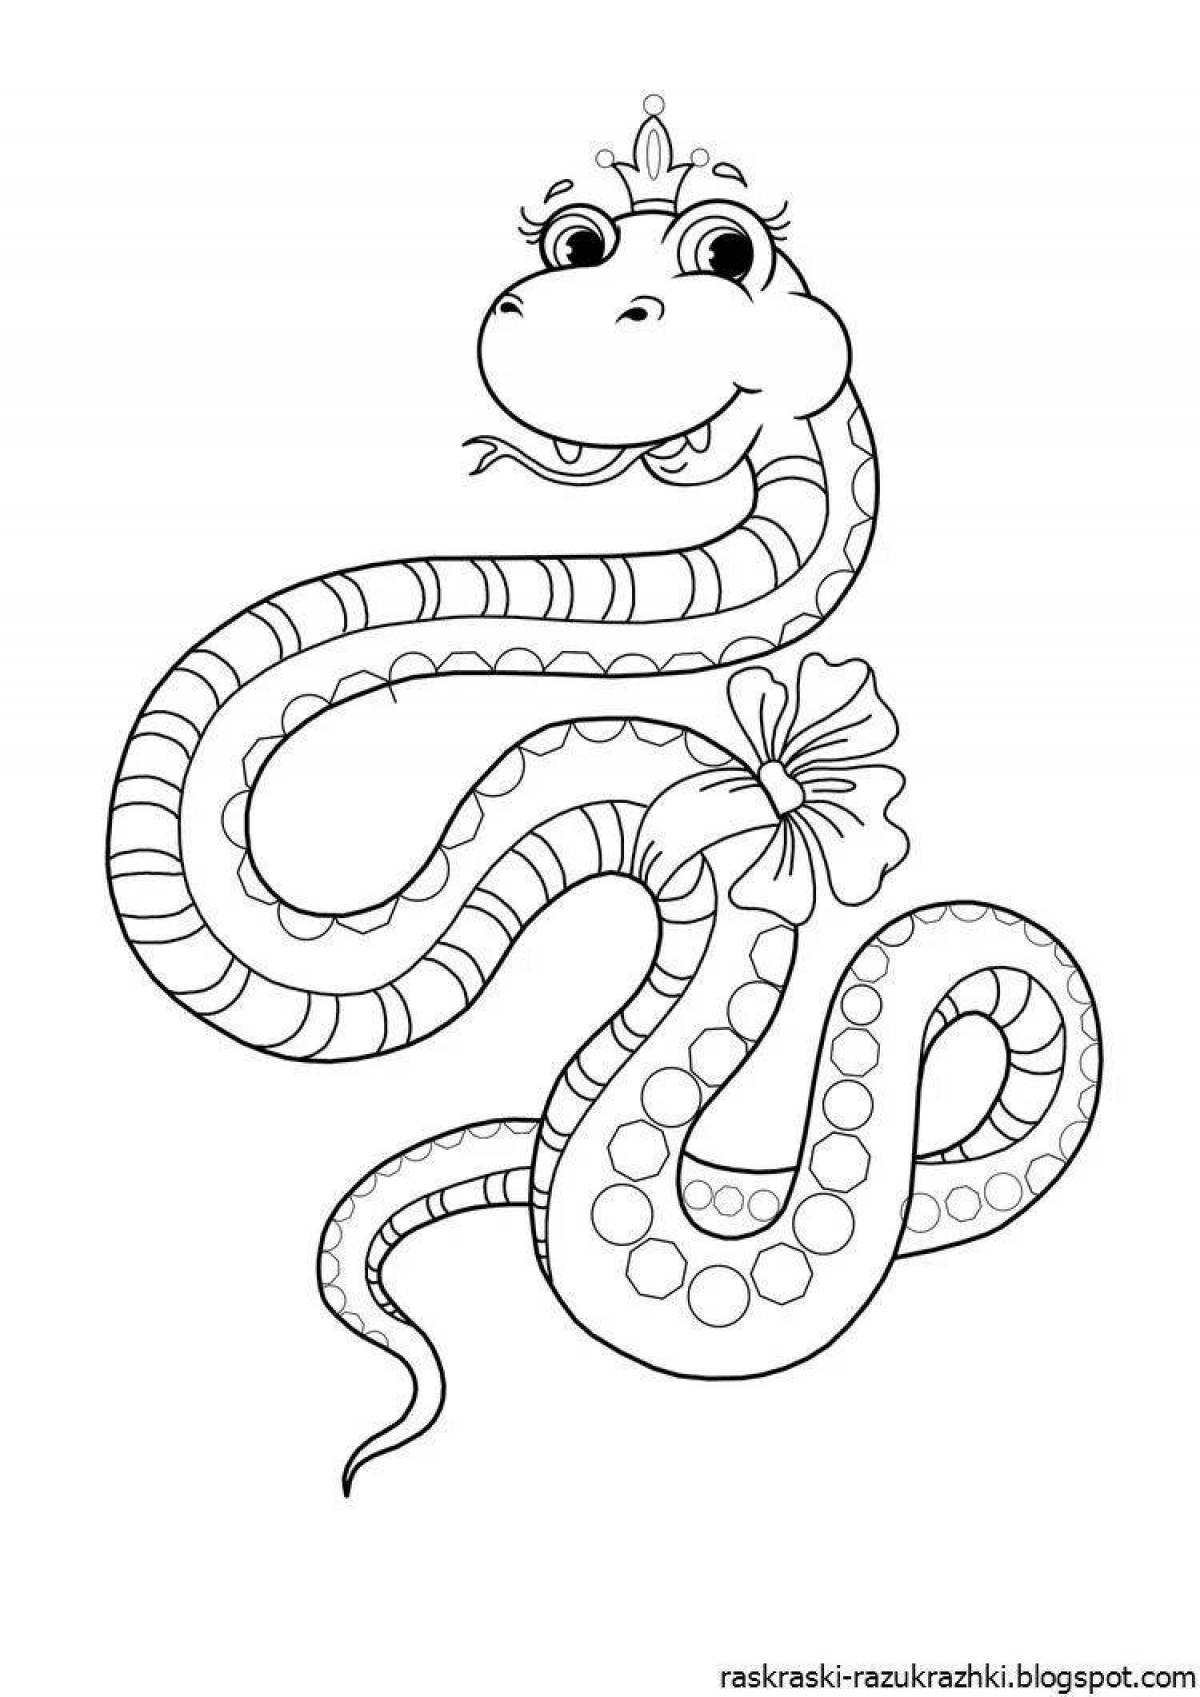 Adorable snake coloring page for kids